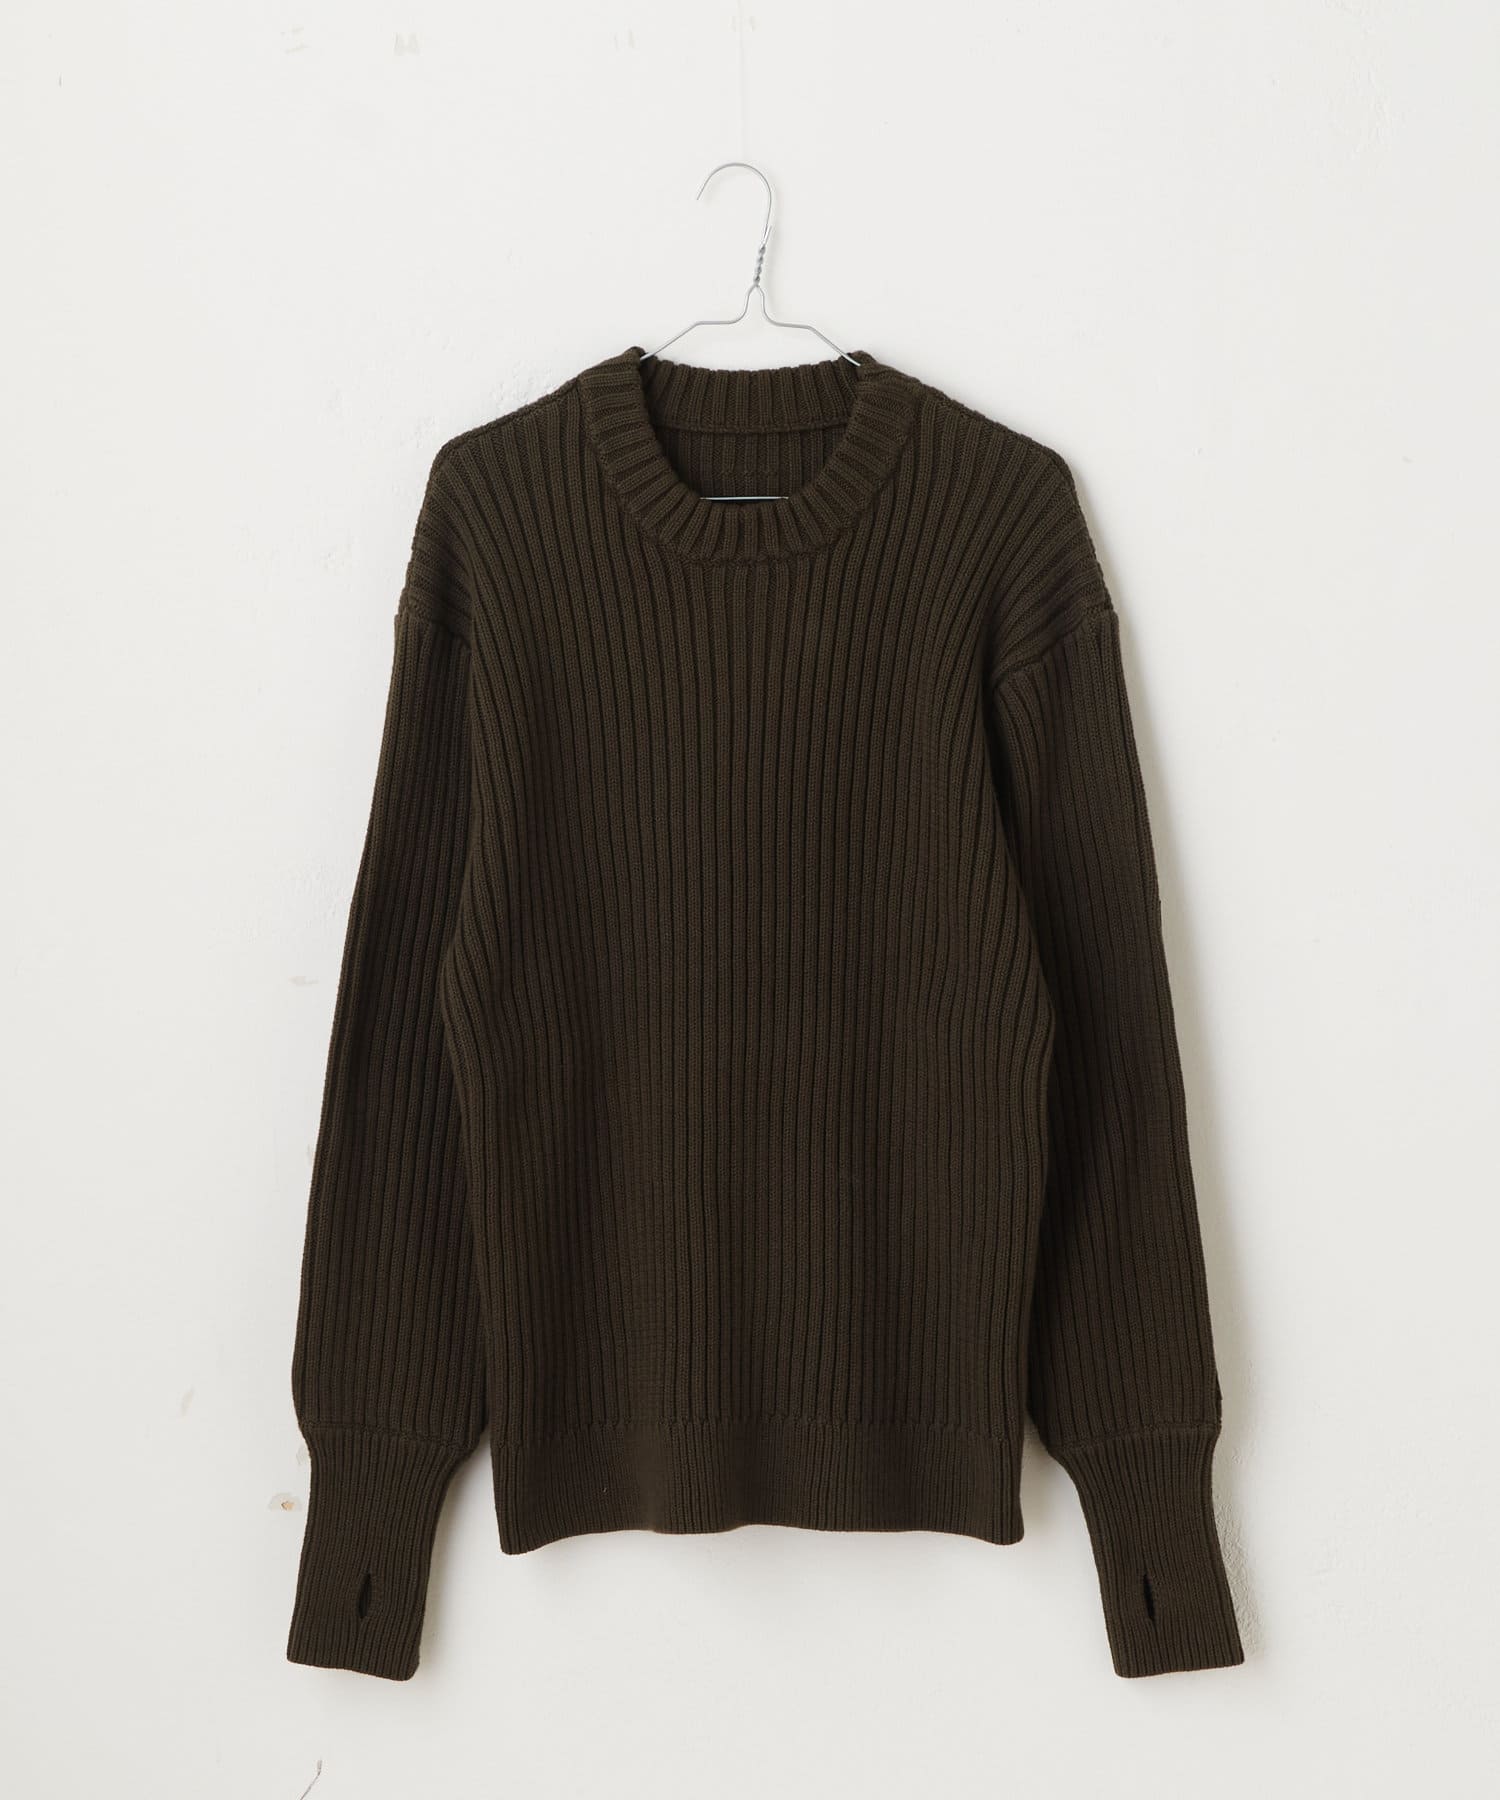 Kastane】COMMANDO SWEATER | OUTLET(アウトレット)レディース | PAL ...